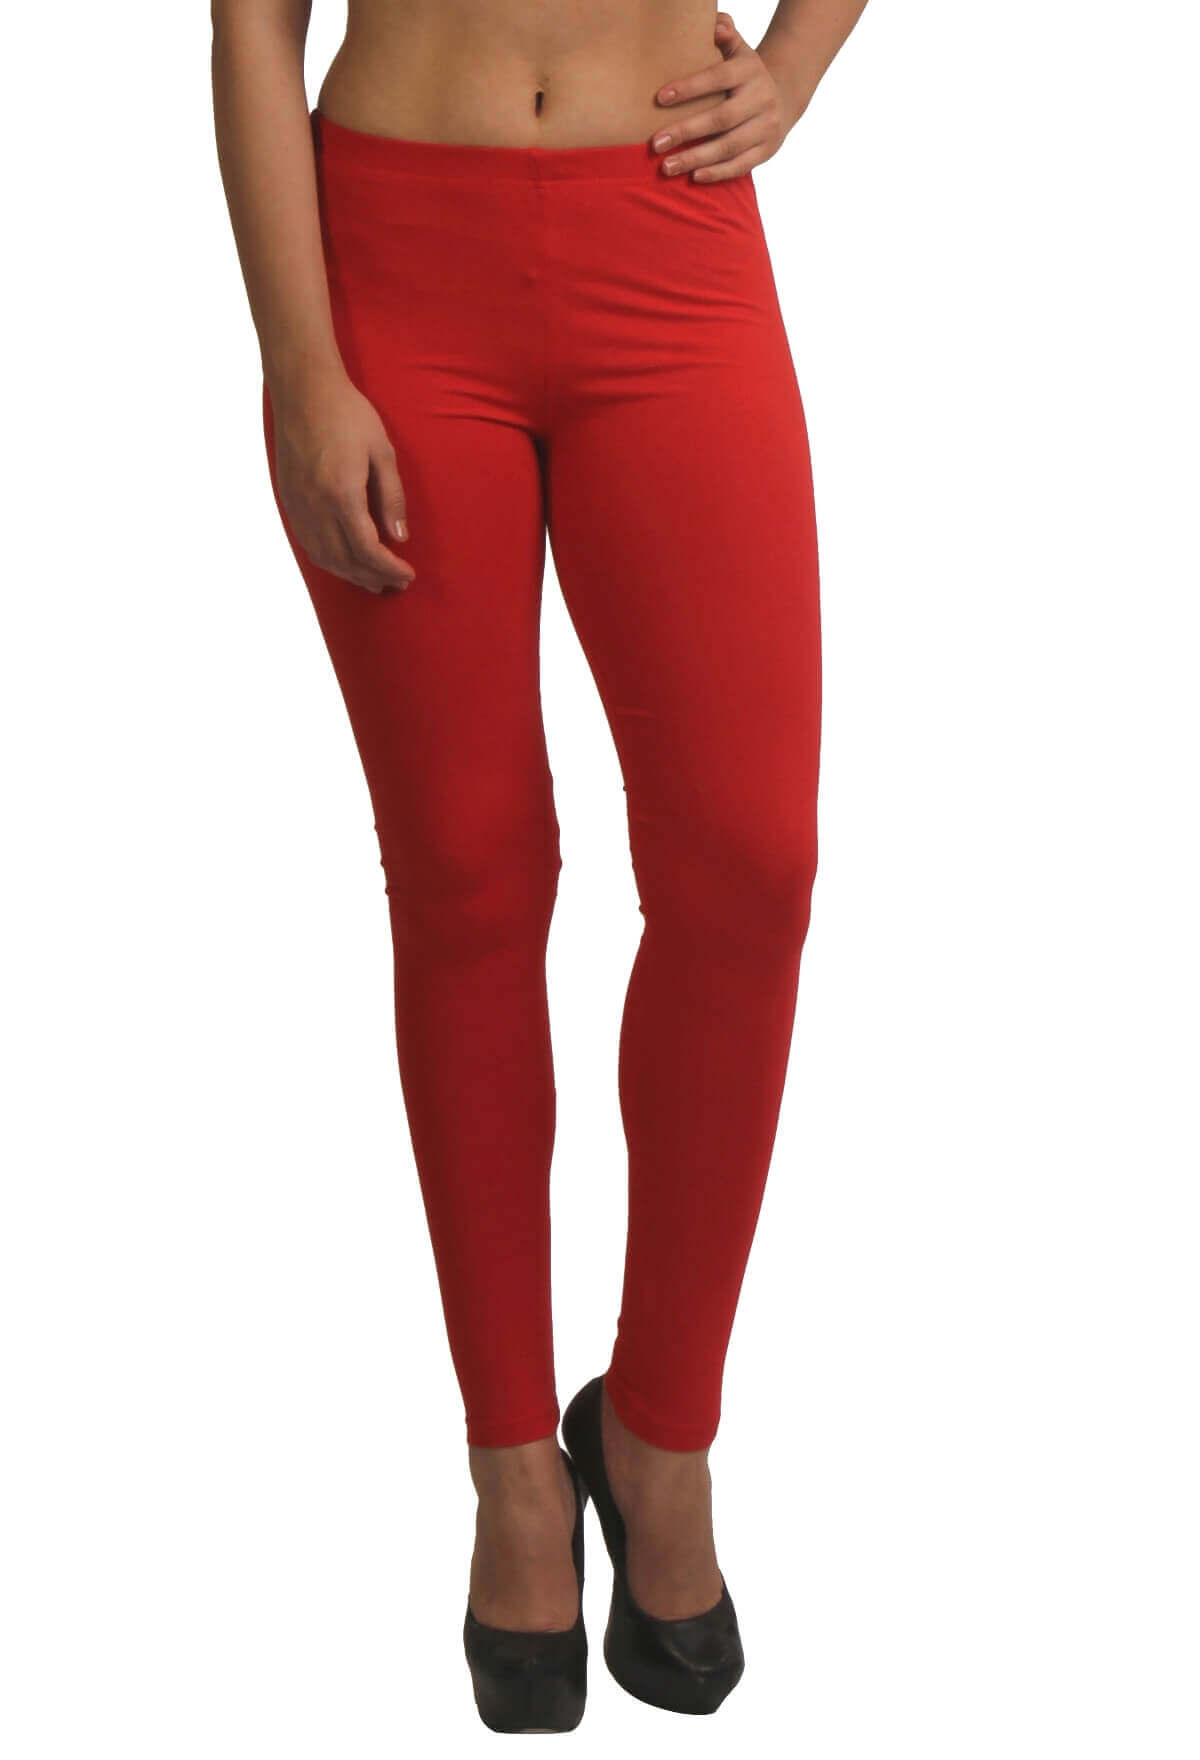 https://frenchtrendz.com/images/thumbs/0002346_frenchtrendz-cotton-spandex-fleece-red-warmer-ankle-leggings.jpeg